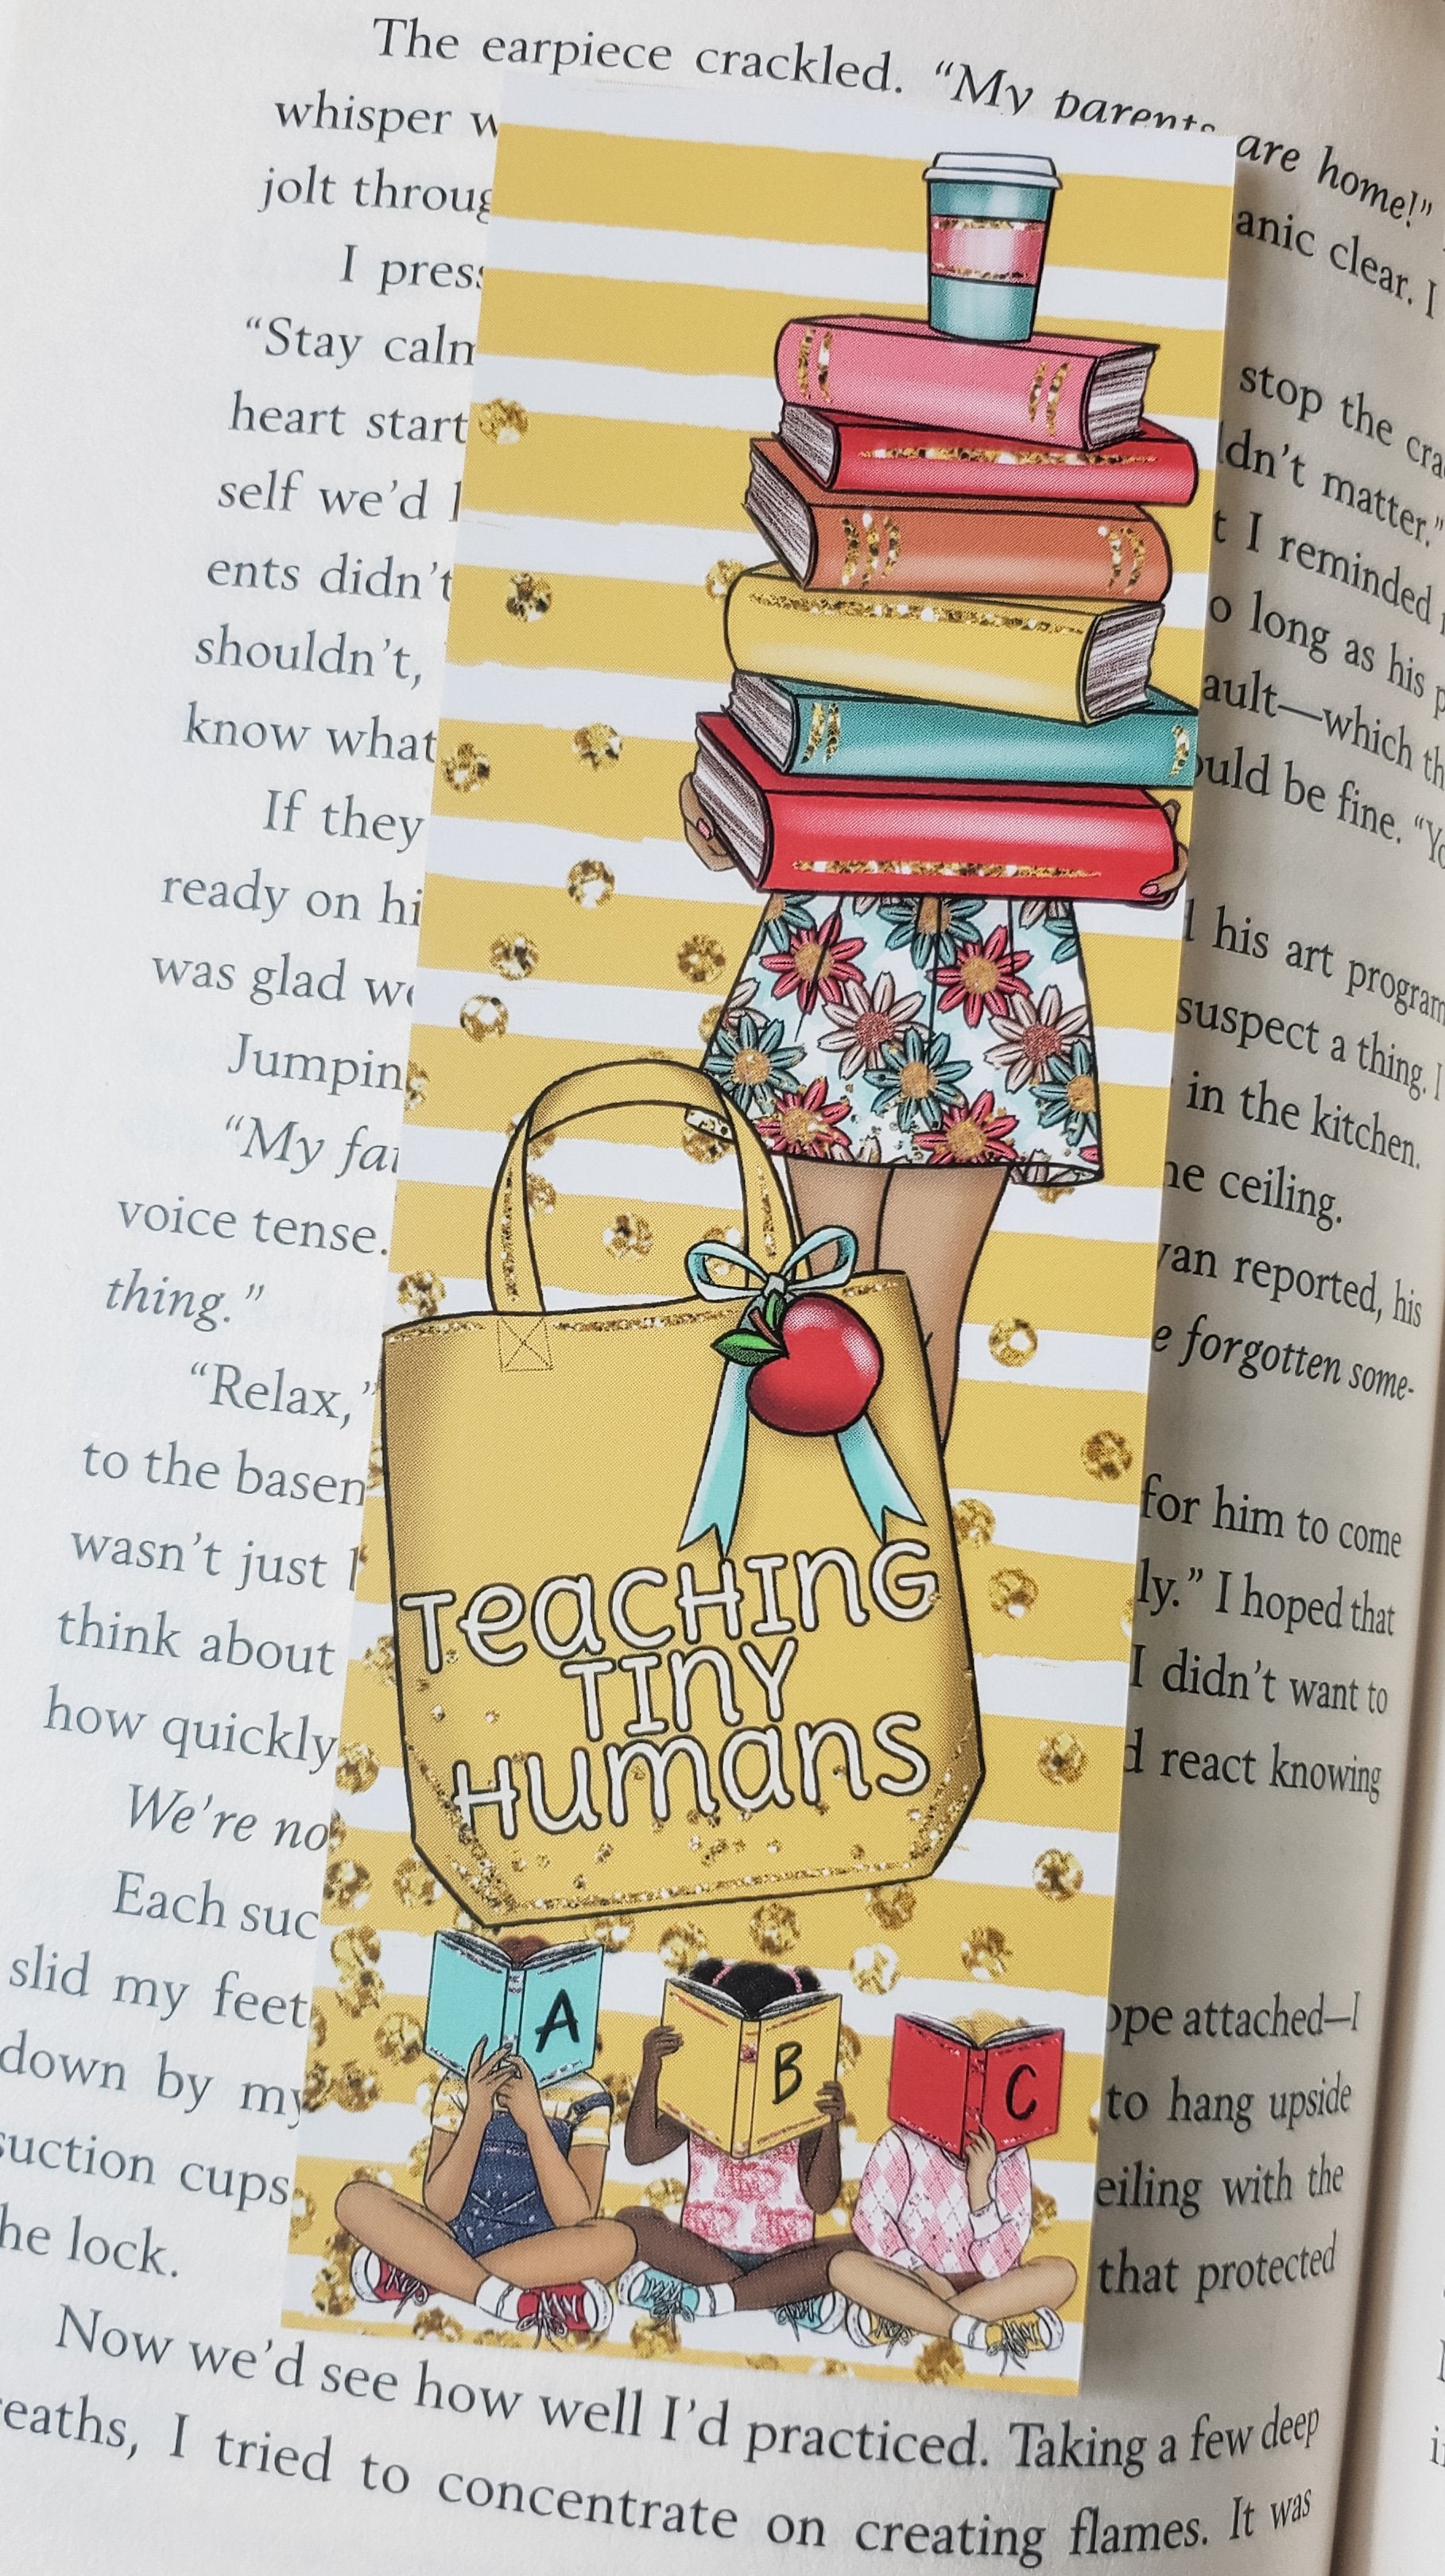 CleartheList Foundation Official Donor Bookmark: Bronze Donor, Double Sided Bookmark - bibliophileprints